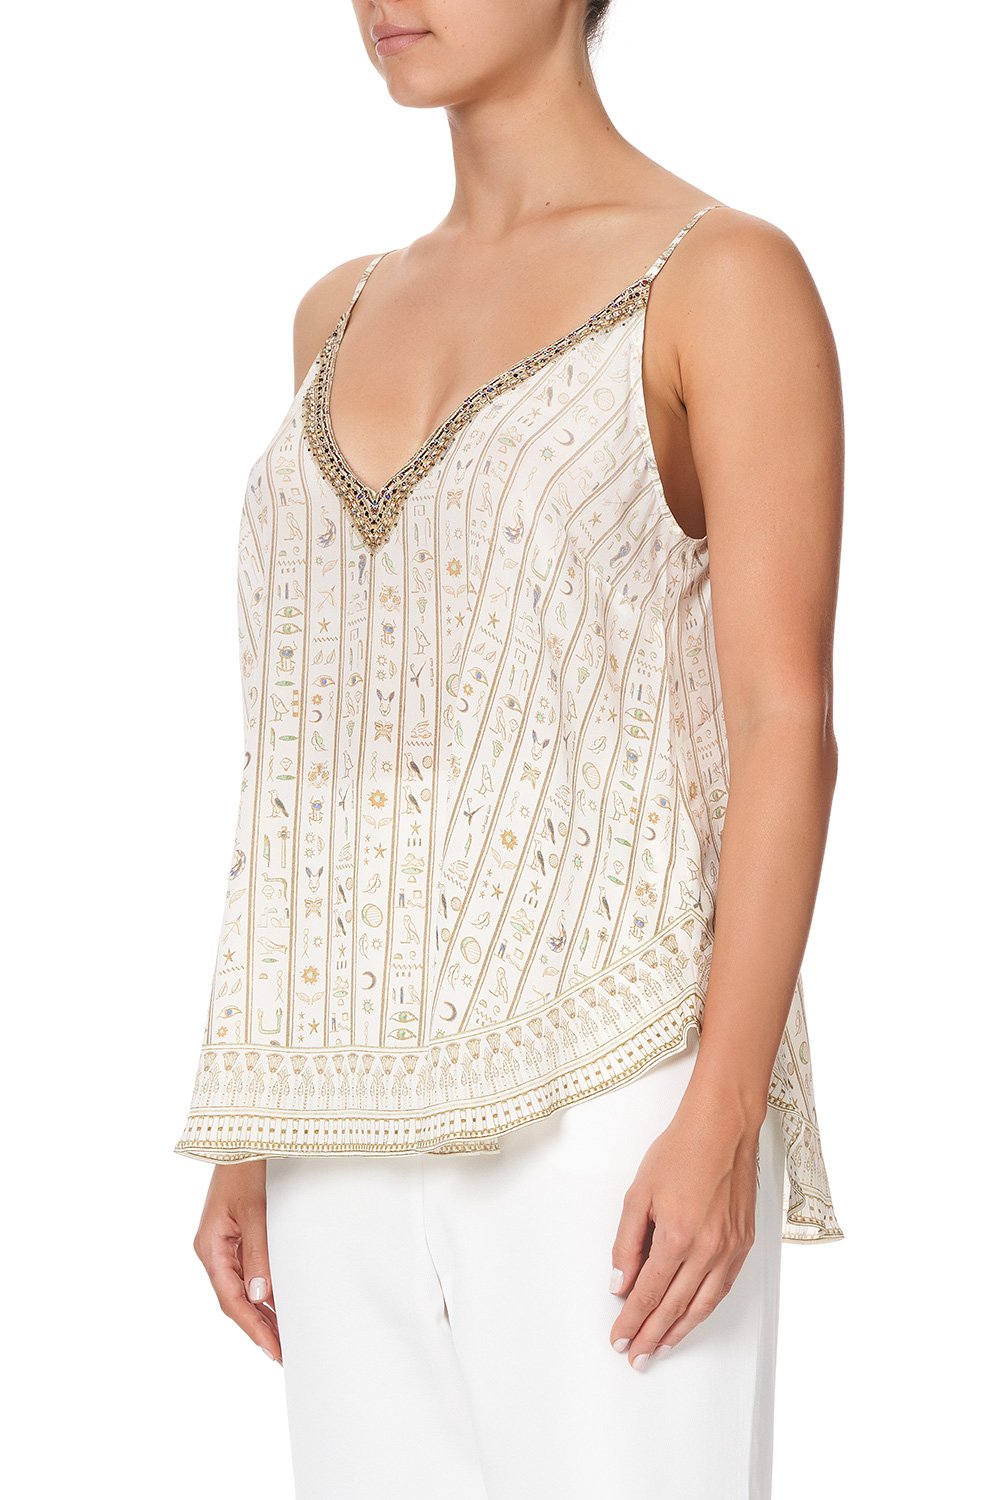 V NECK CAMI THE QUEENS CHAMBER